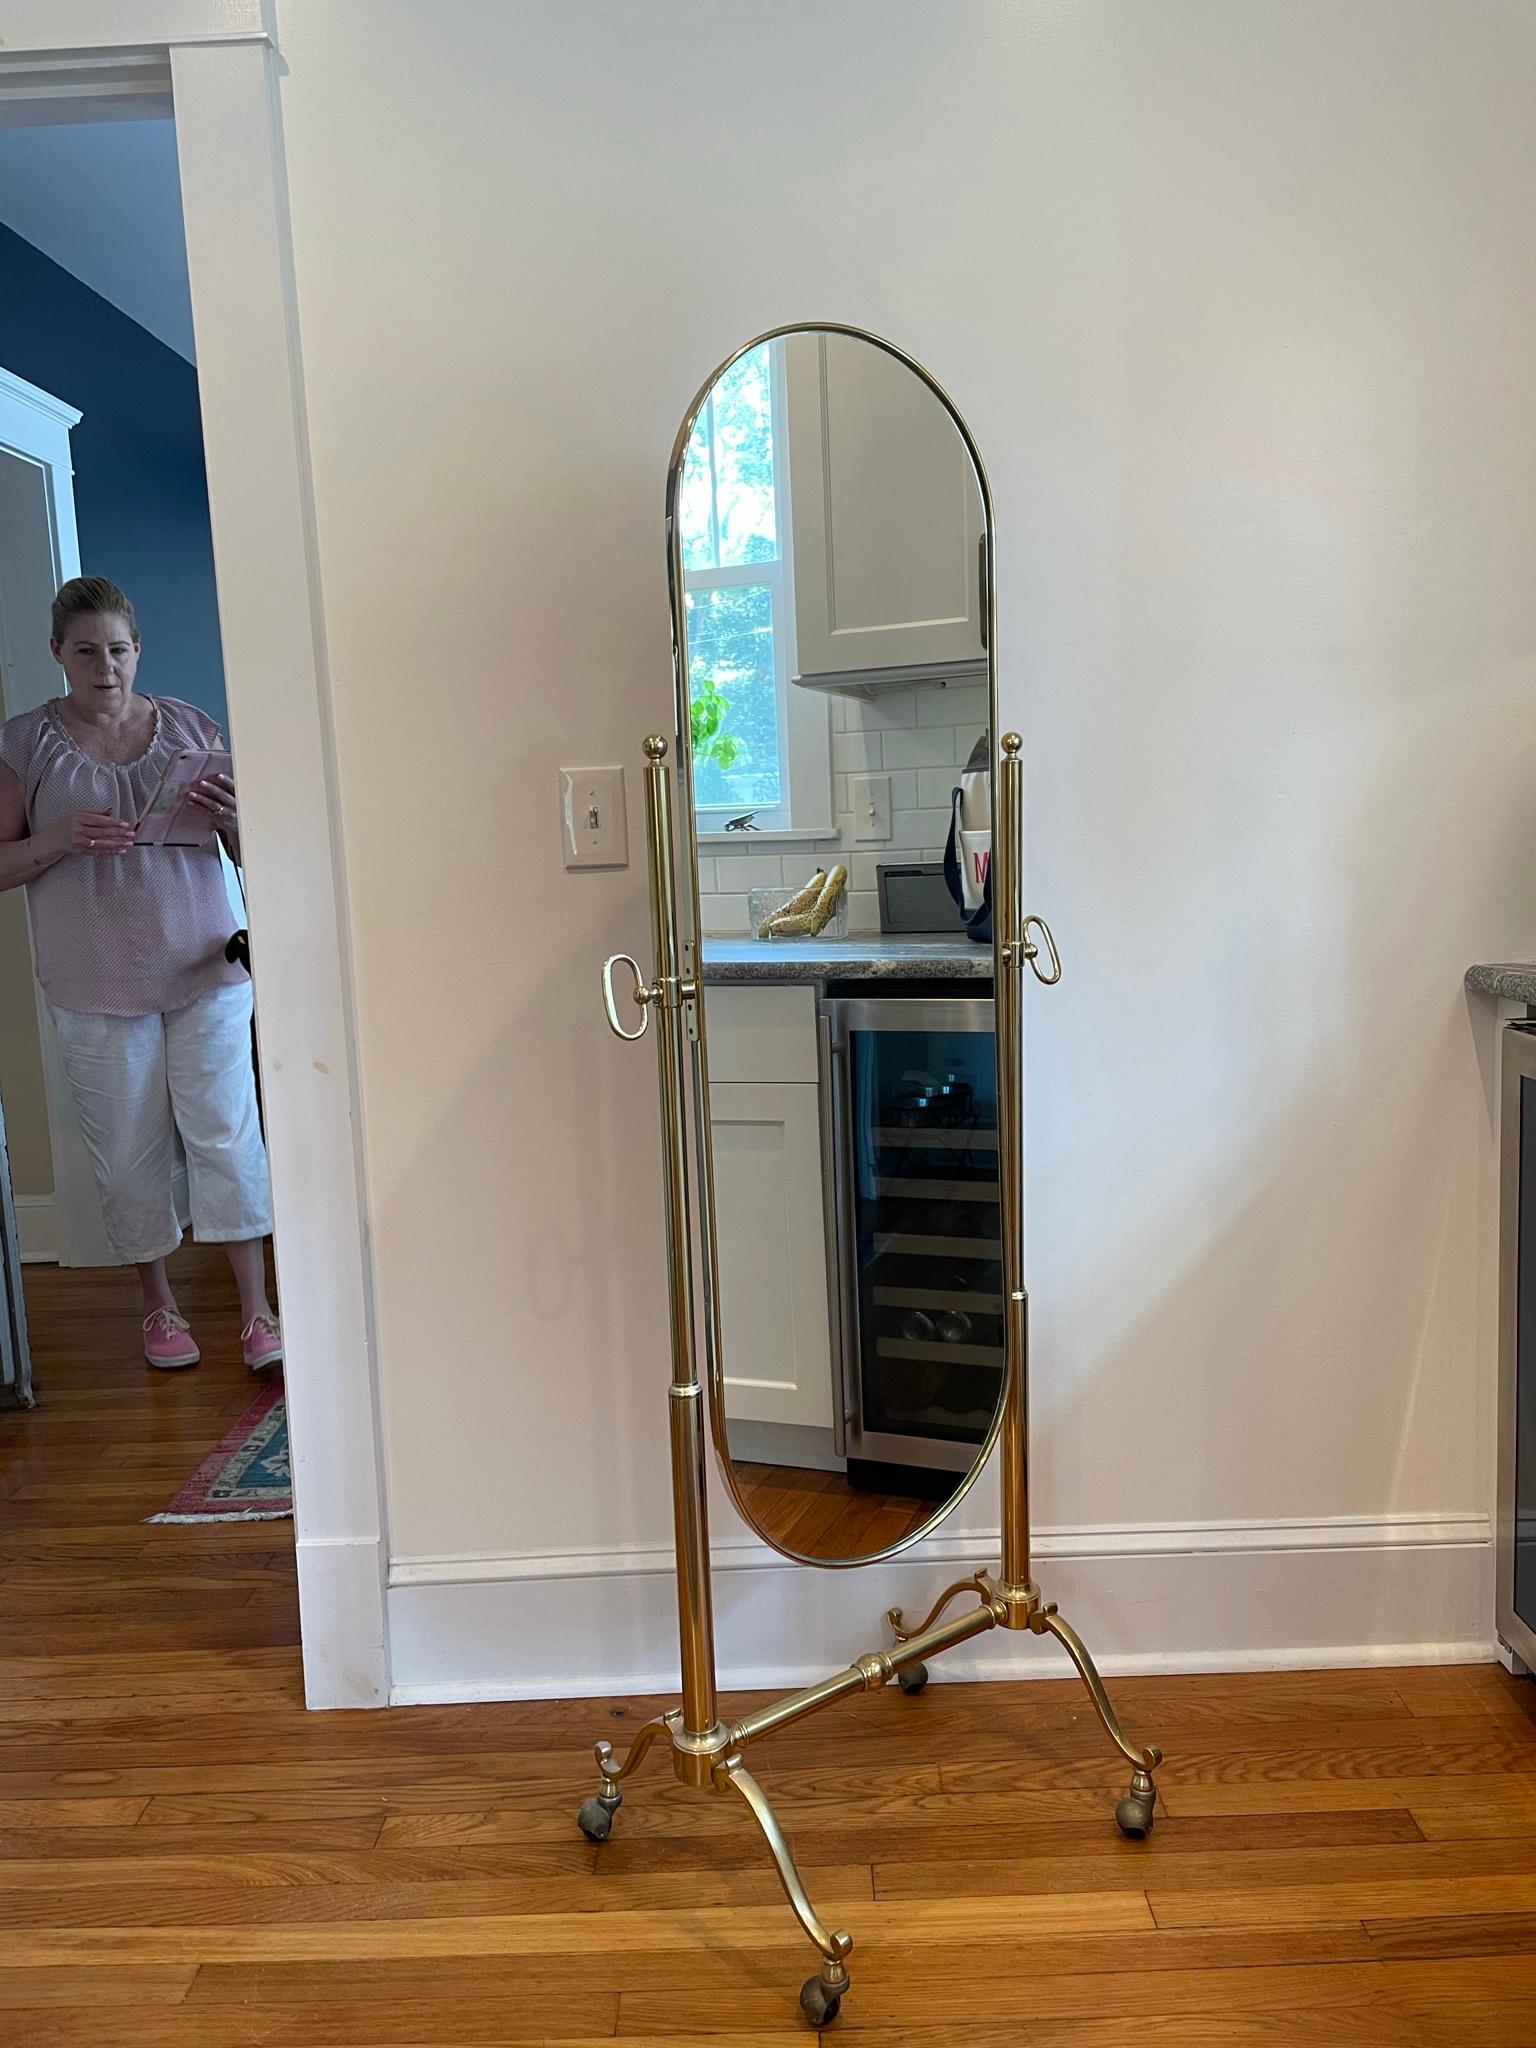 Beautiful full length floor mirror. Racetrack mirror tilts for versatility and caster wheels for easy positioning. Clean simplistic lines blend with multiple decor. Classic!.